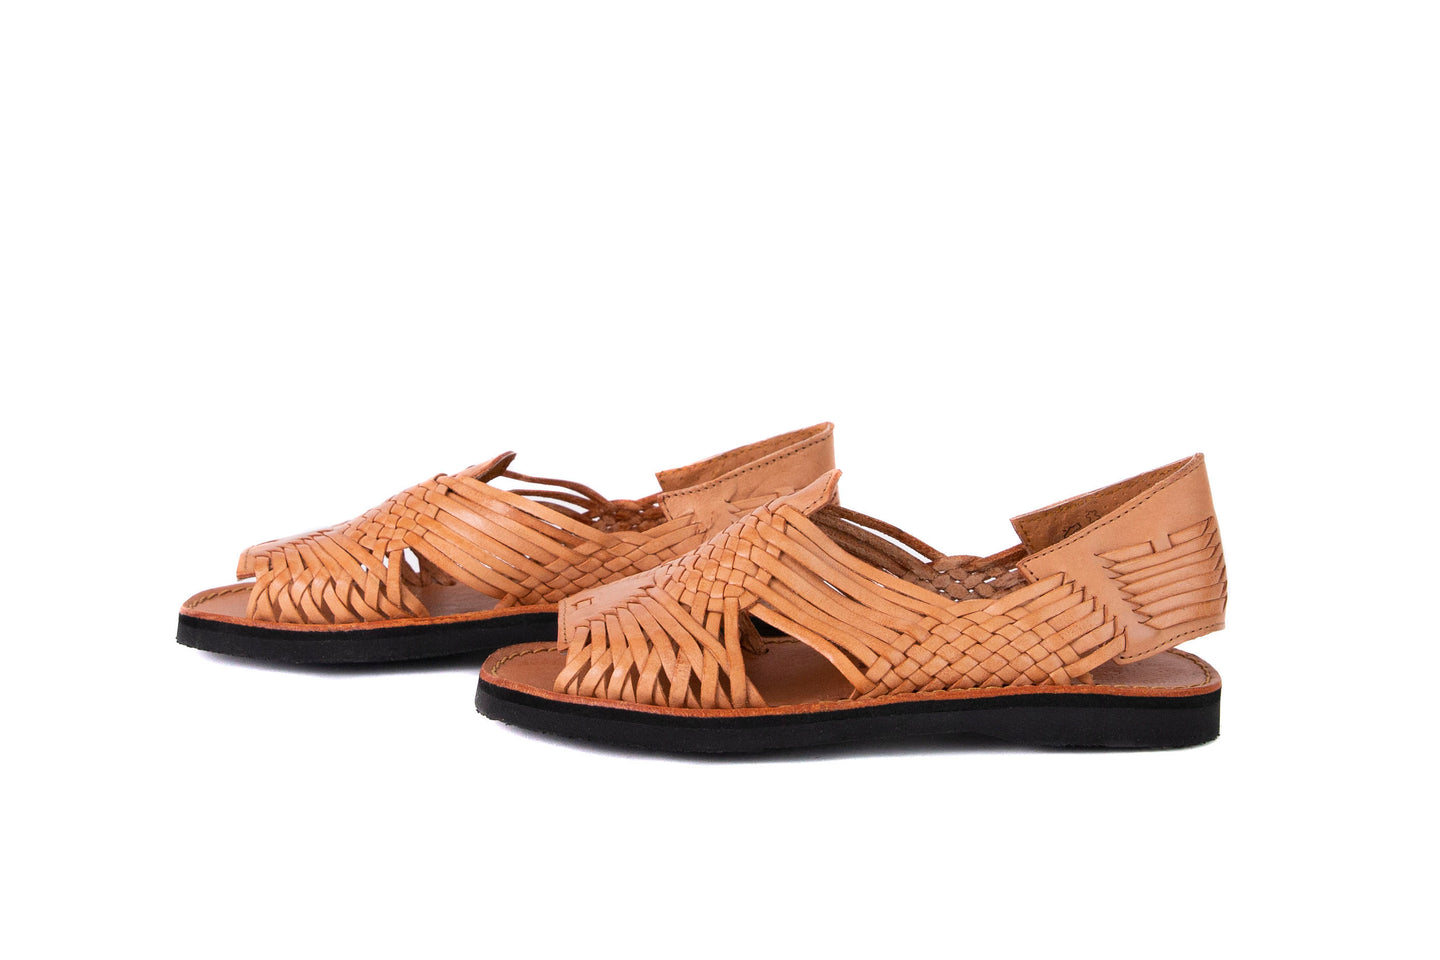 SIDREY Women's Pachuco Fino Style Huarache Sandals - Tanned Natural